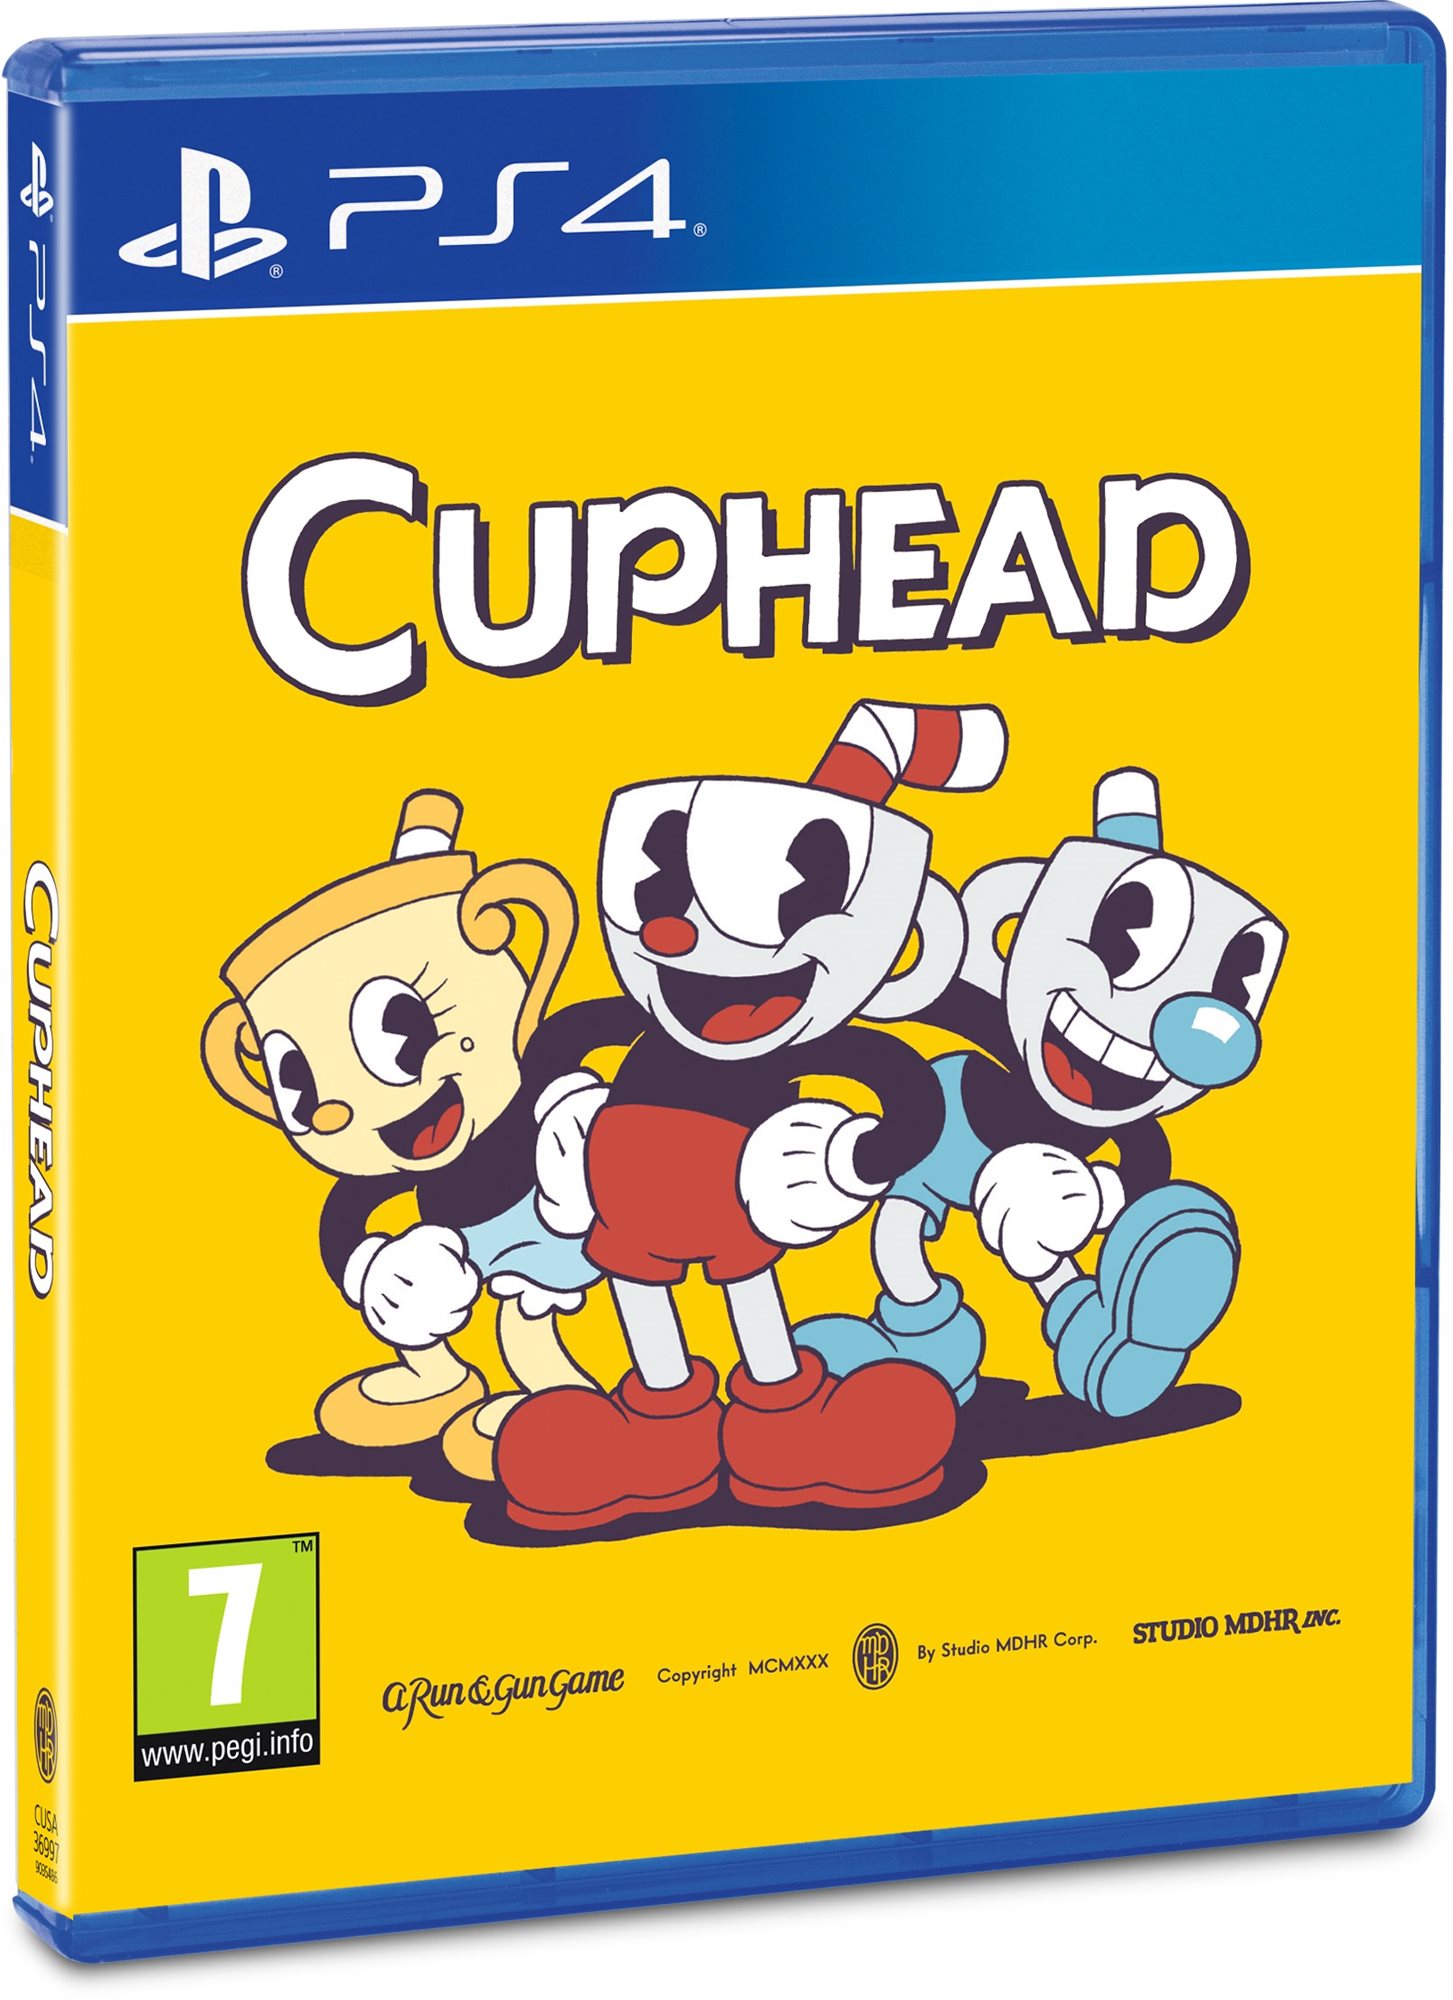 Cuphead Physical Edition - PS4